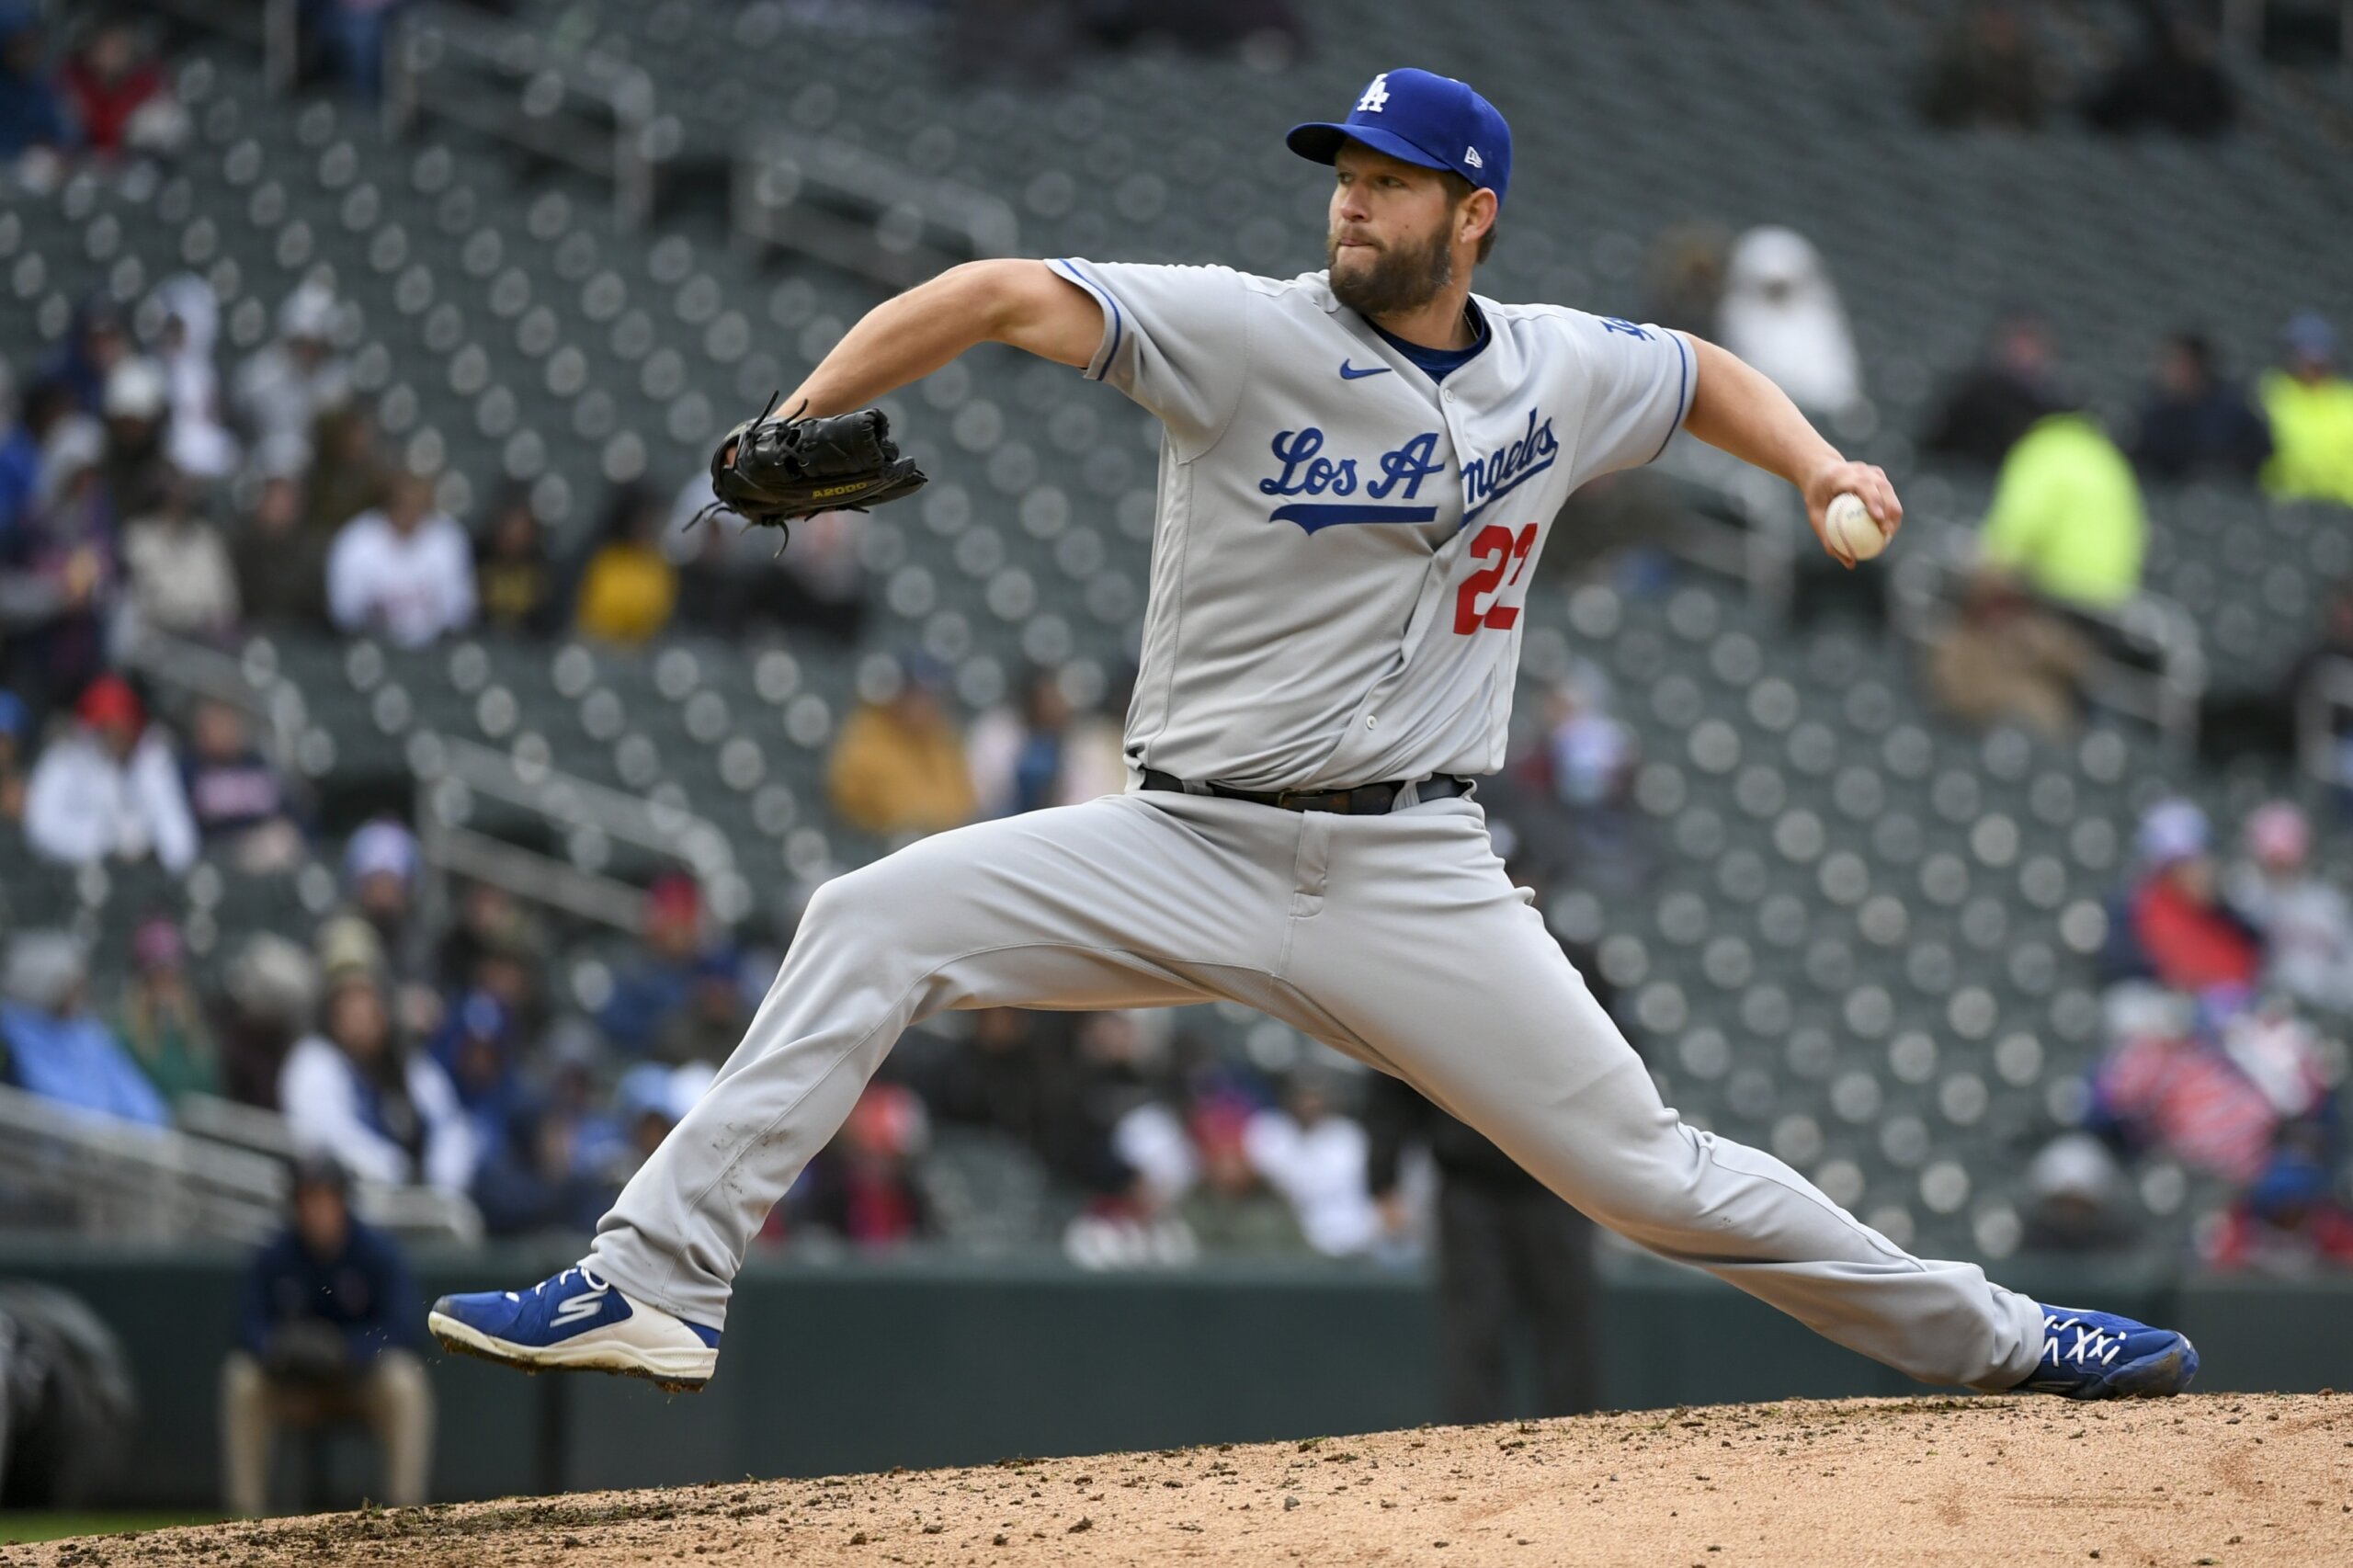 Kershaw perfect through 7 innings, Dodgers beat Twins 7-0 | WTOP News